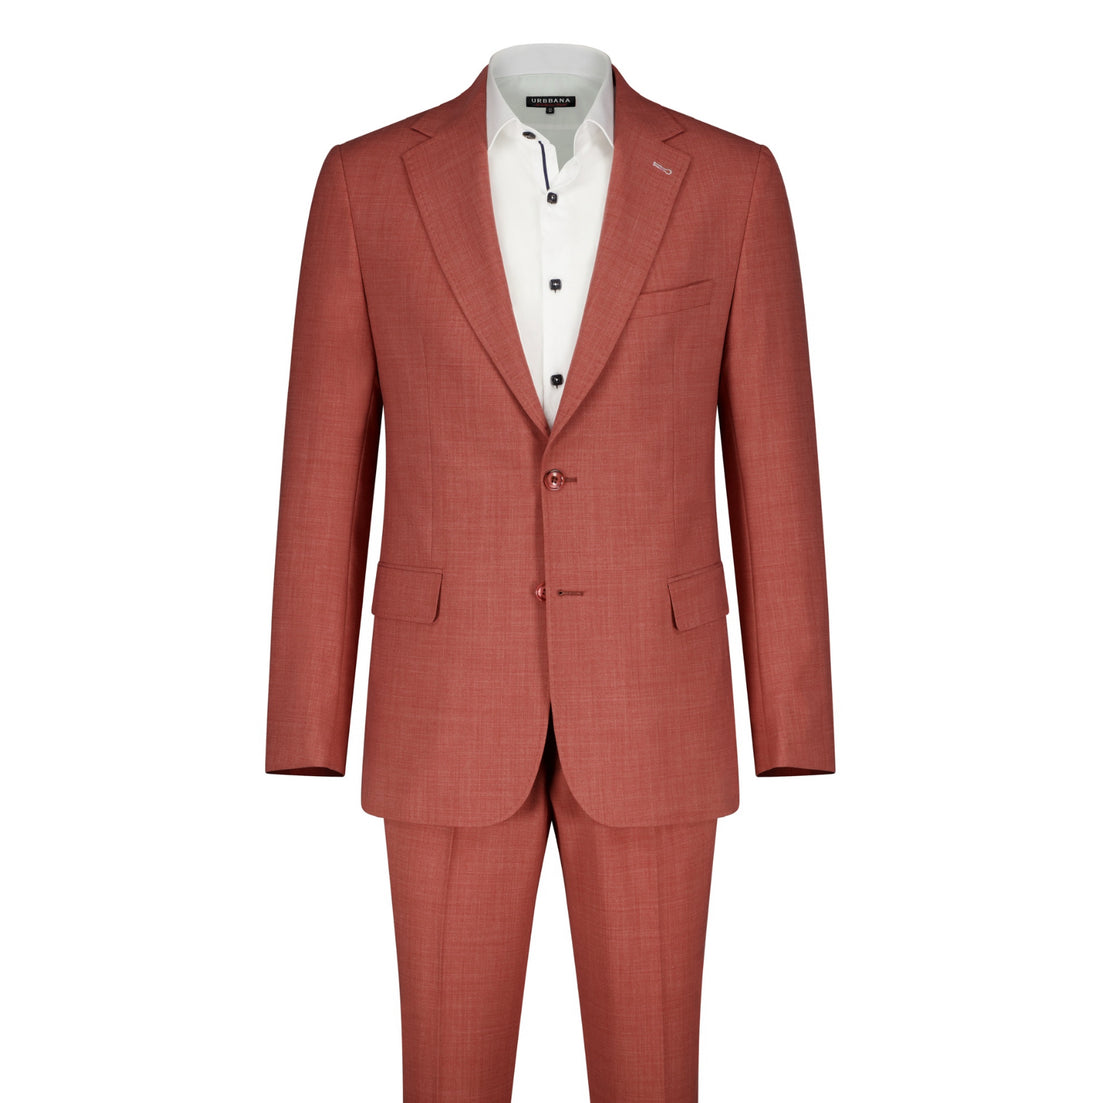 The Coral Suit - Suit by Urbbana